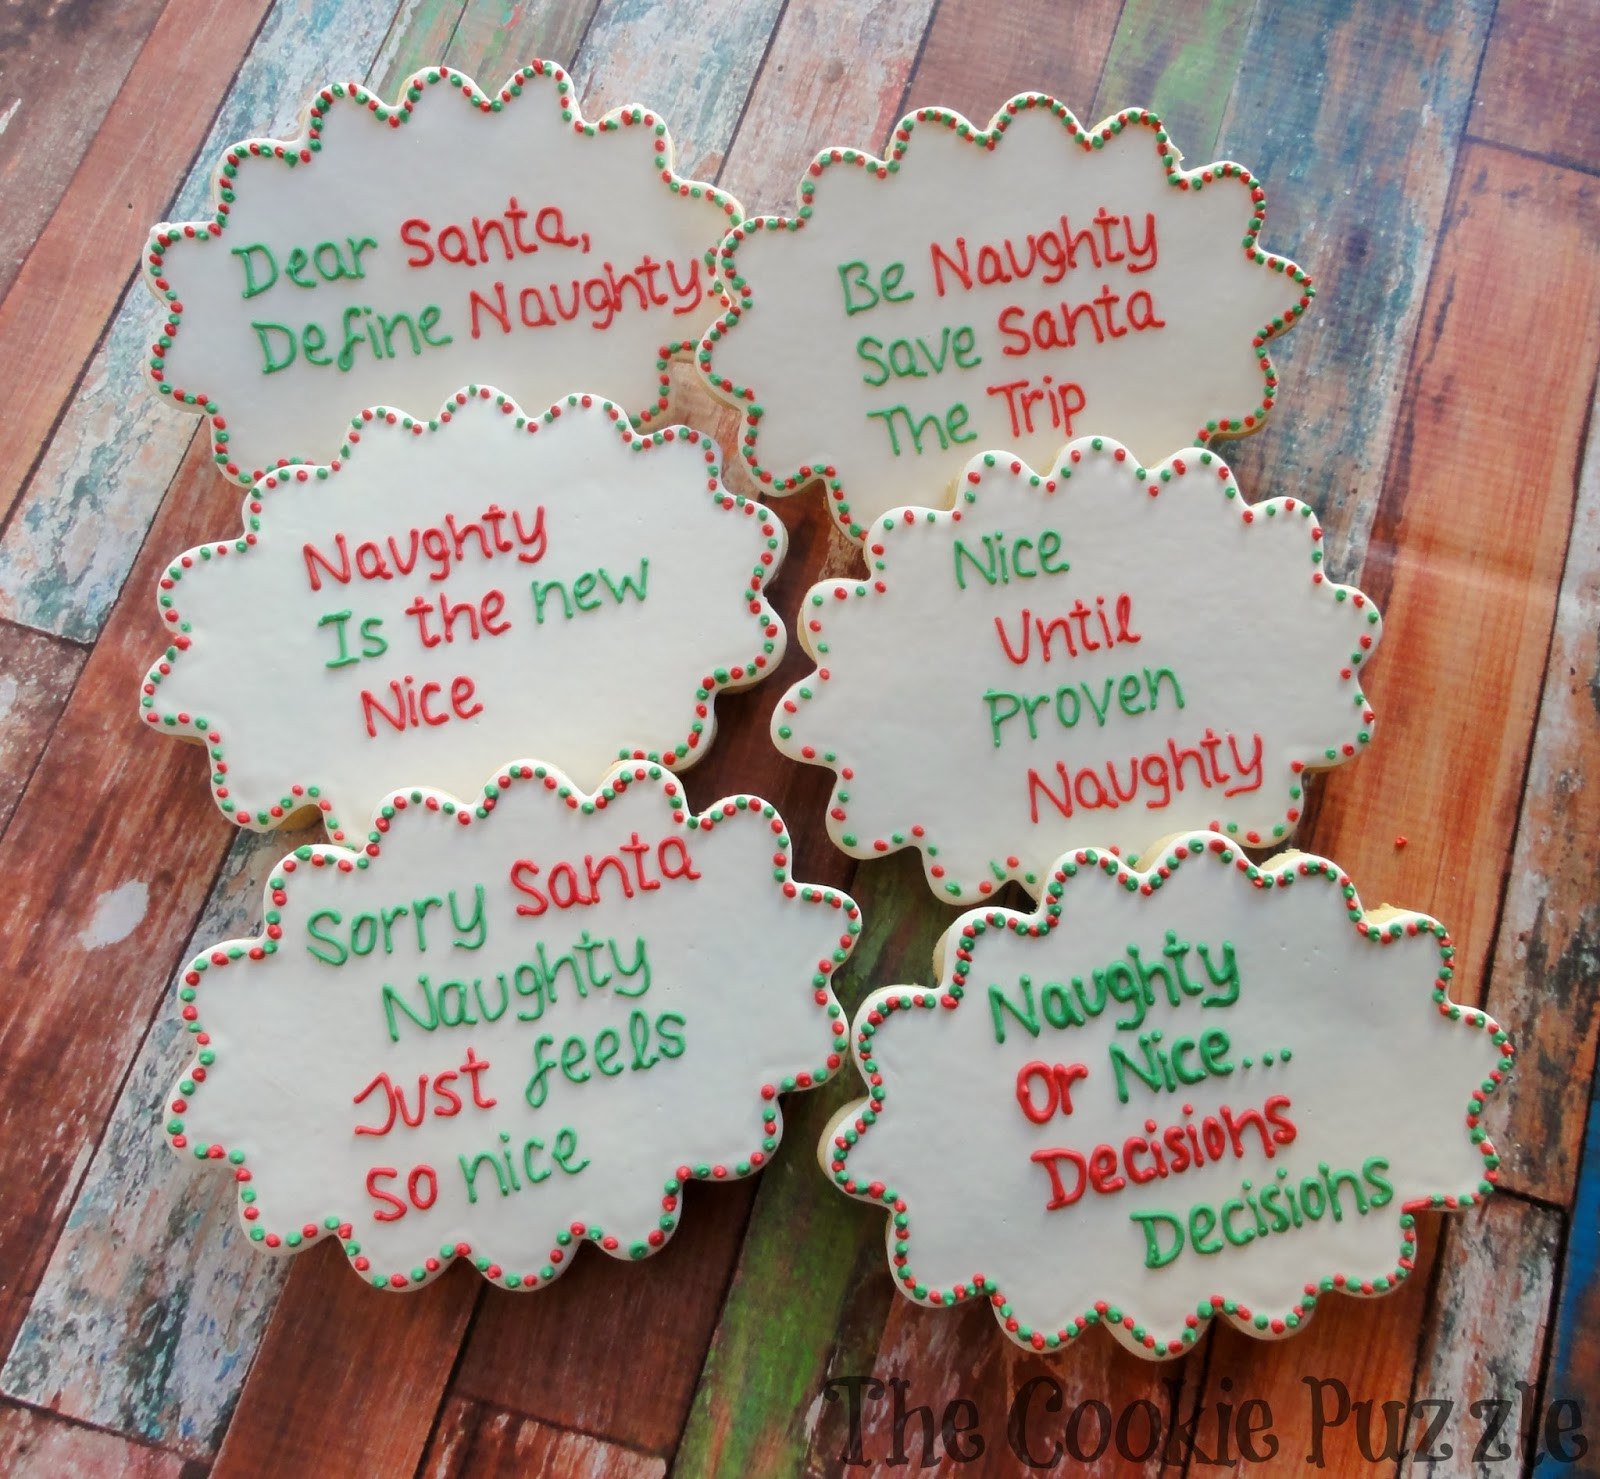 Christmas Cookie Quote
 The Cookie Puzzle Naughty and Nice Christmas Cookies